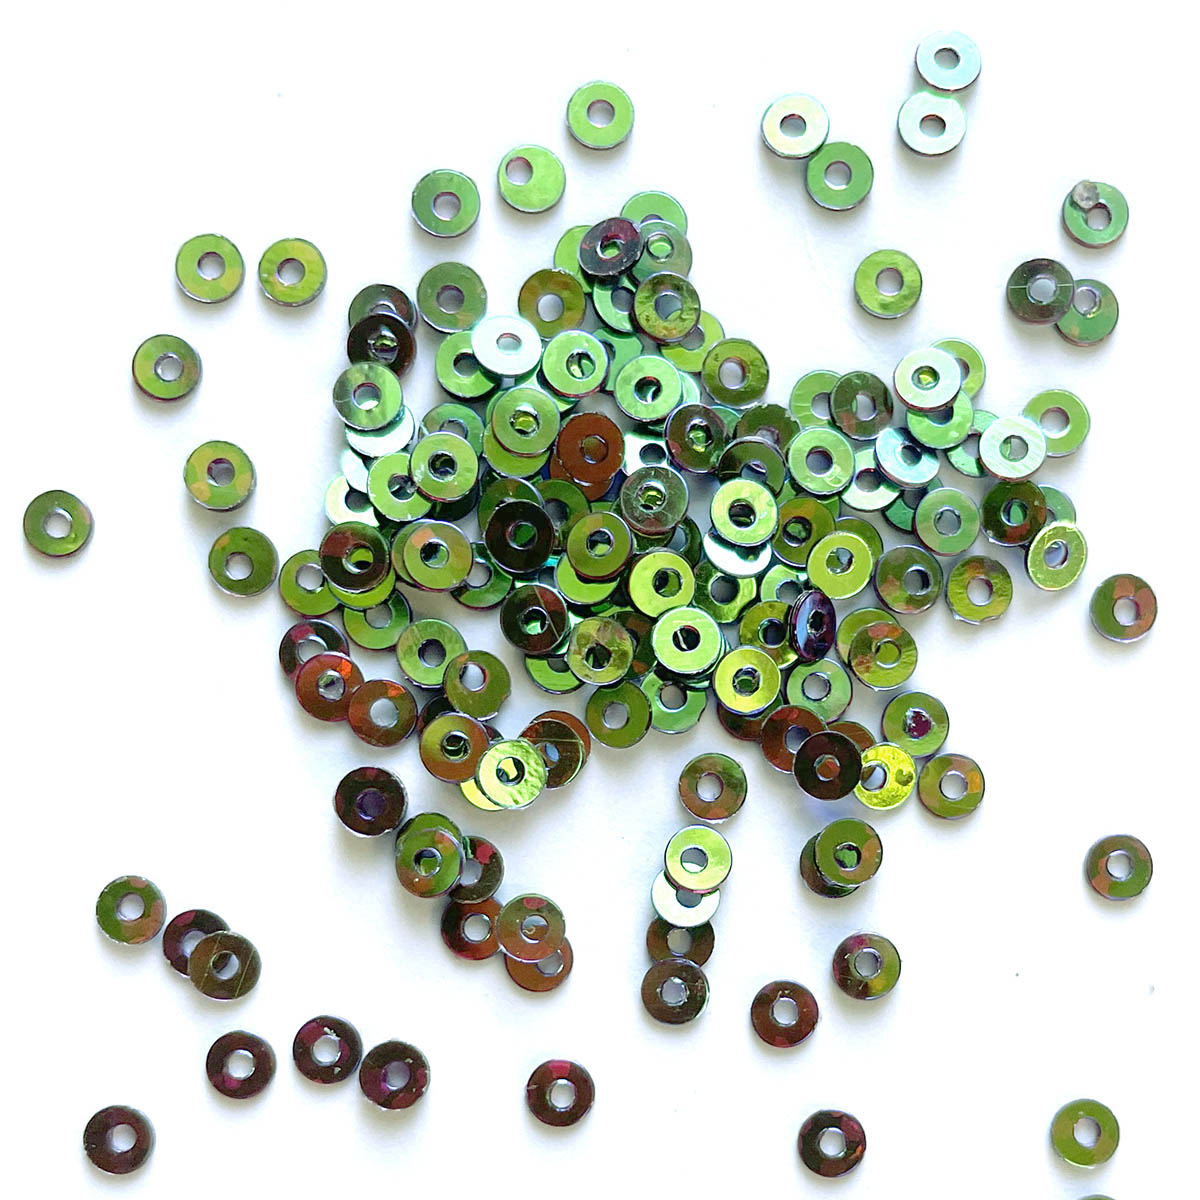 www.colourstreams.com.au Colour Streams Embroidery Stitching Embellishments Costumes Theatre Sequins Shiny Flat Circle Green with Blue and Green Lights 3mm S227